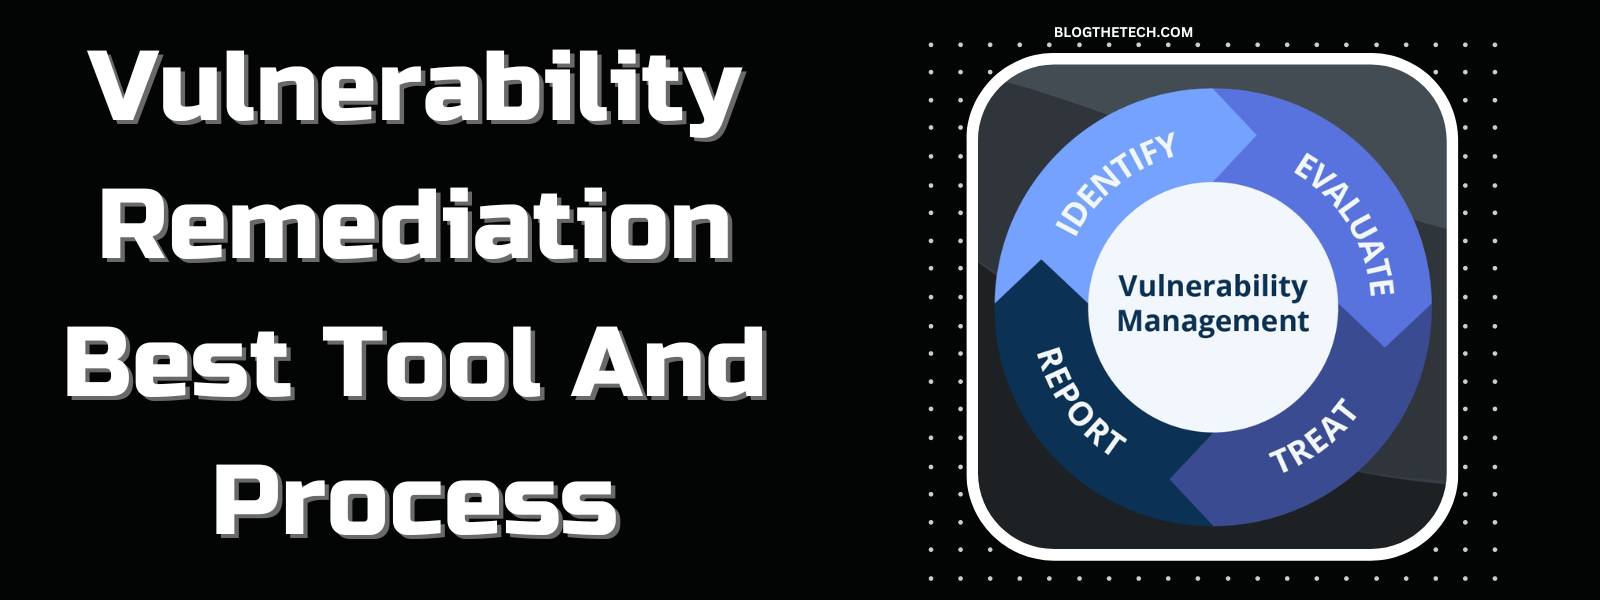 Vulnerability-Remediation-Best-Tool-And-Process-Featured